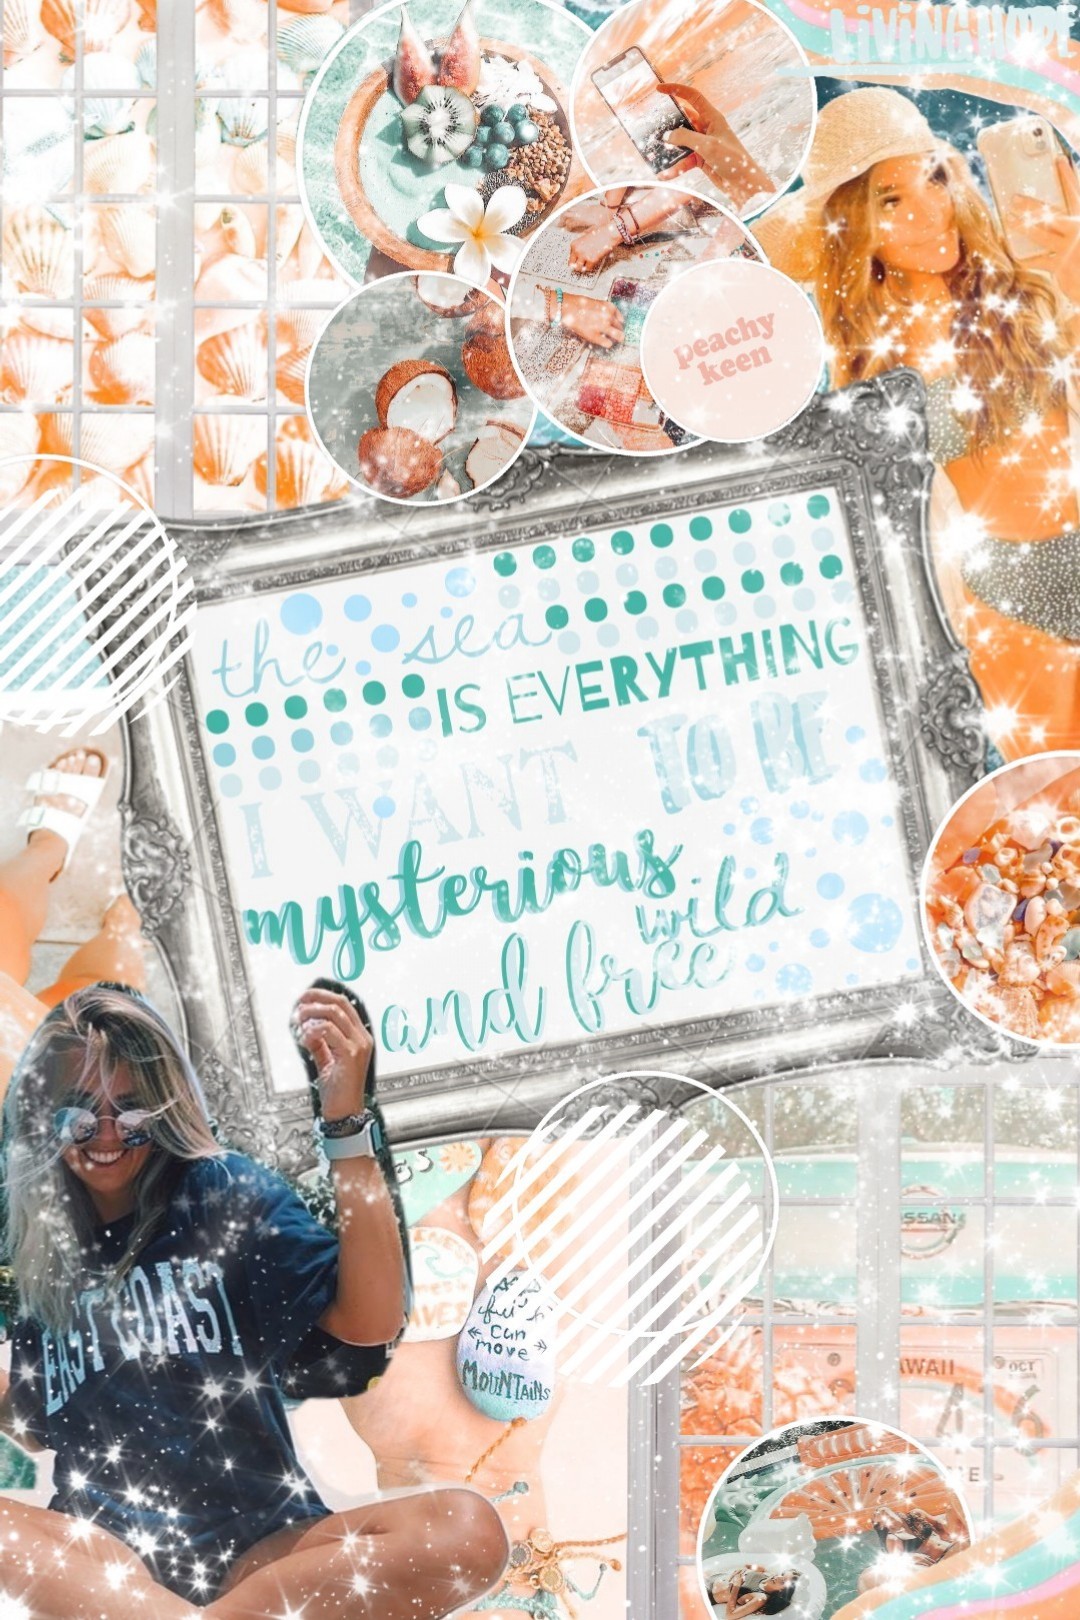 🍑 Tap 🍑

4•9•21

Hi y'all! What do you think of this?? I really like this one I think this is one of my favorite collages I've done so far! Hope you guys are doing well! Qotd: Spring or Summer? Summer all the way!! 